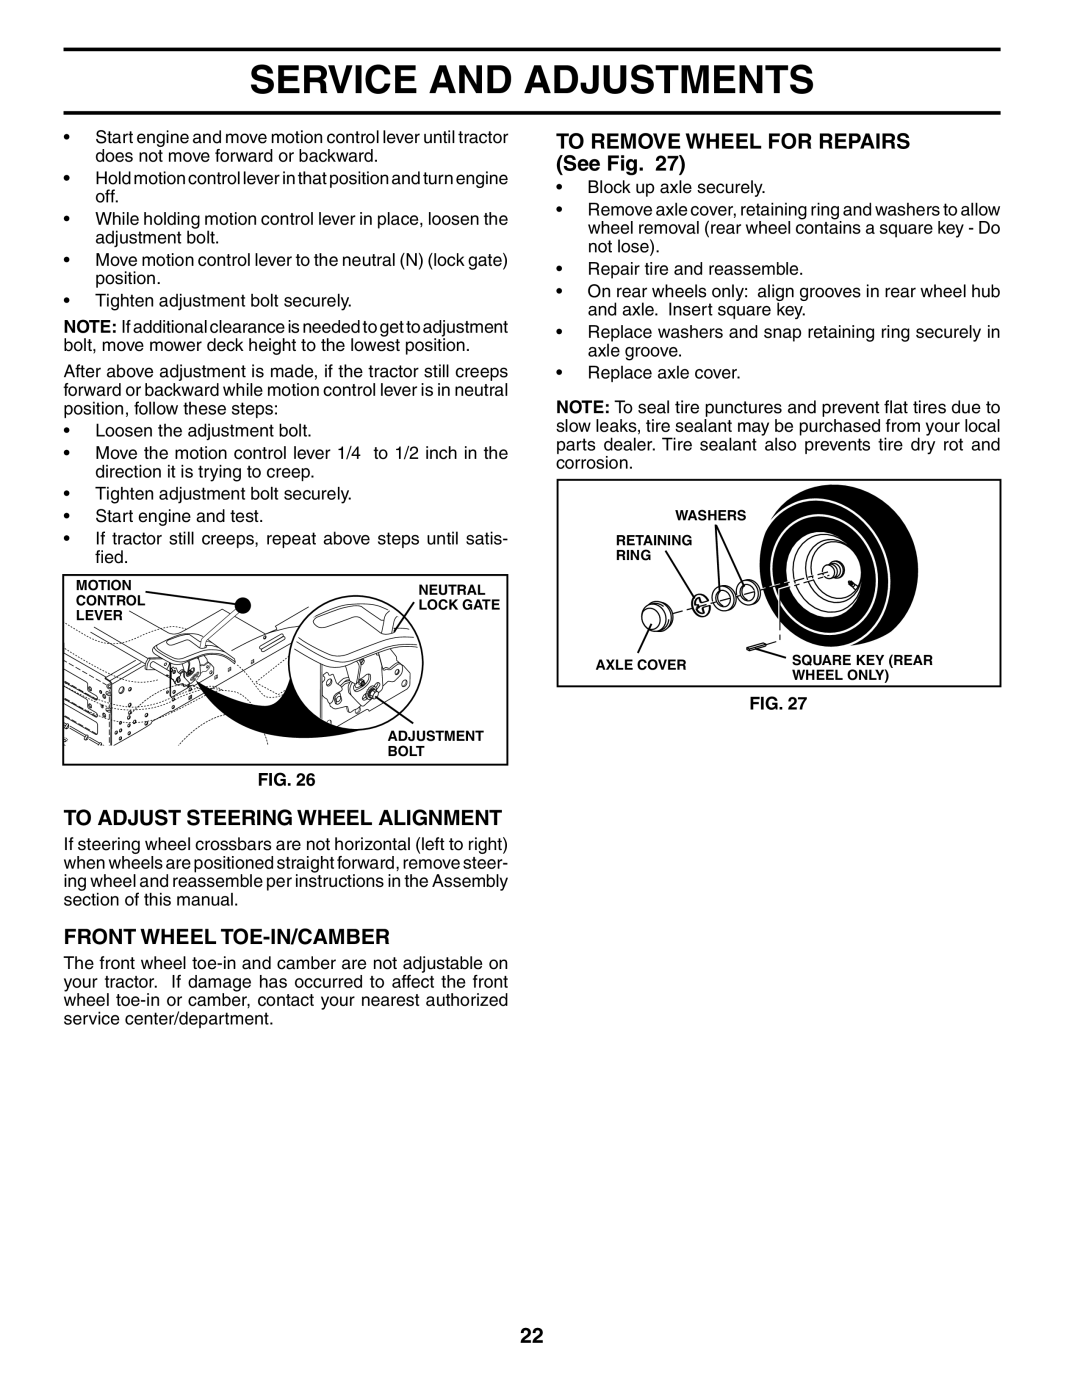 Husqvarna YTH2242 To Adjust Steering Wheel Alignment, Front Wheel Toe-In/Camber, TO REMOVE WHEEL FOR REPAIRS See Fig 